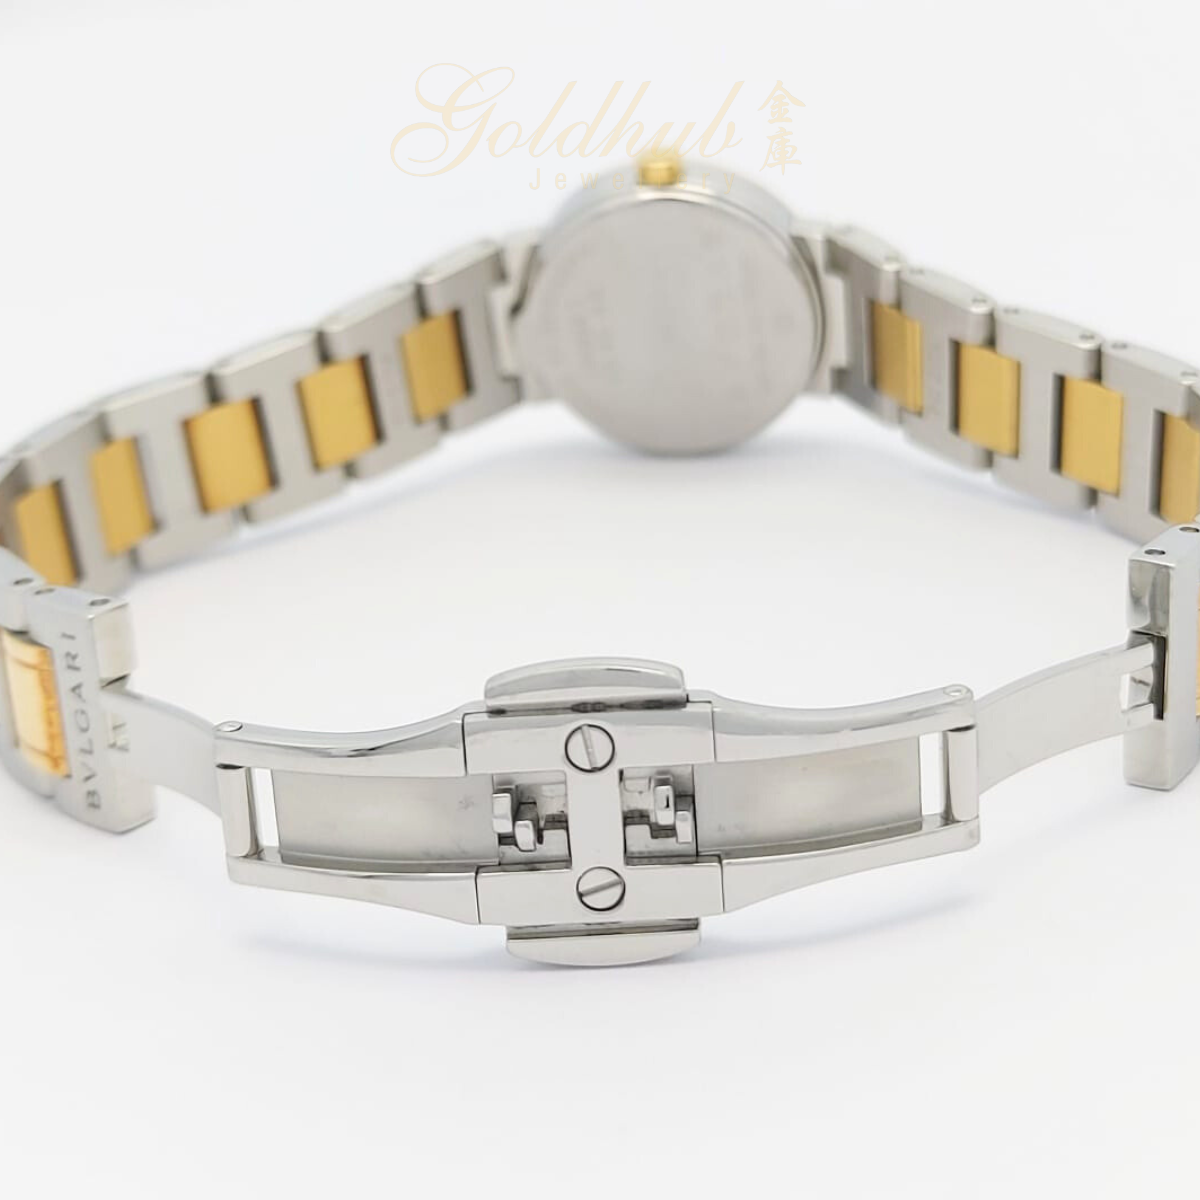 [FURTHER DISCOUNTED] Pre-loved BVLGARI BVLGARI Lady Quartz Watch in Stainless Steel